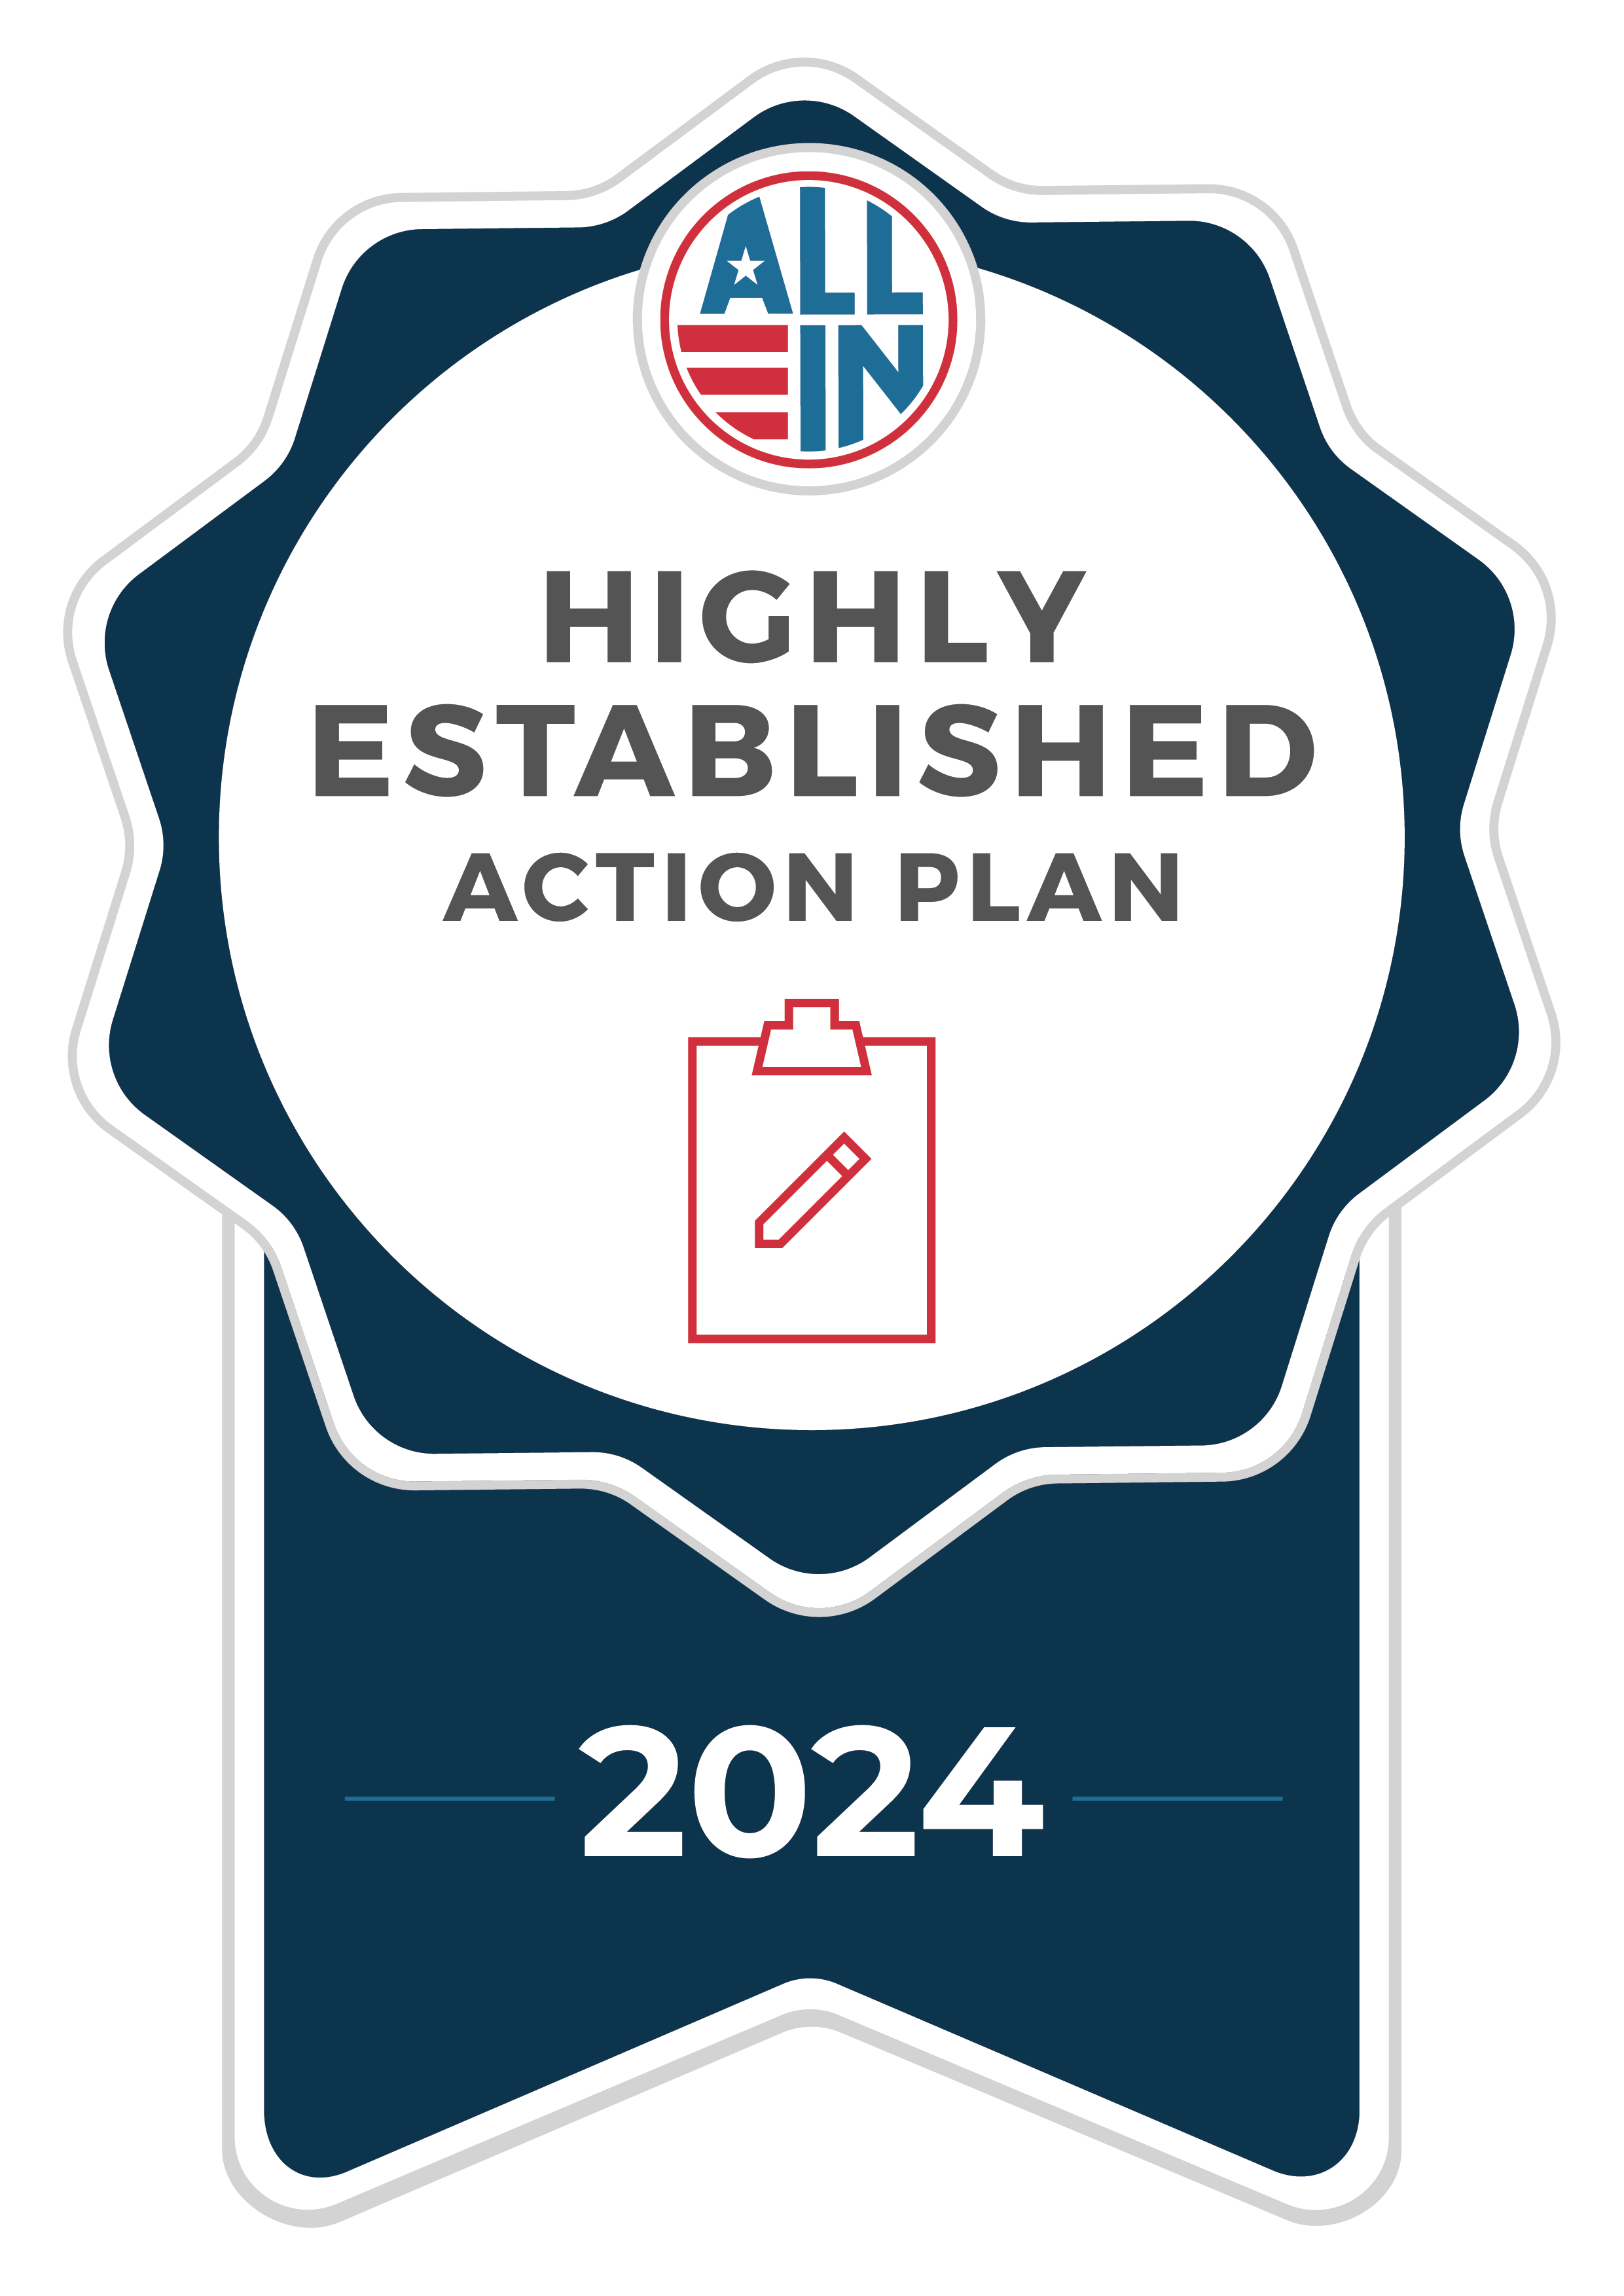 All-In Highly Established Action Plan 2024